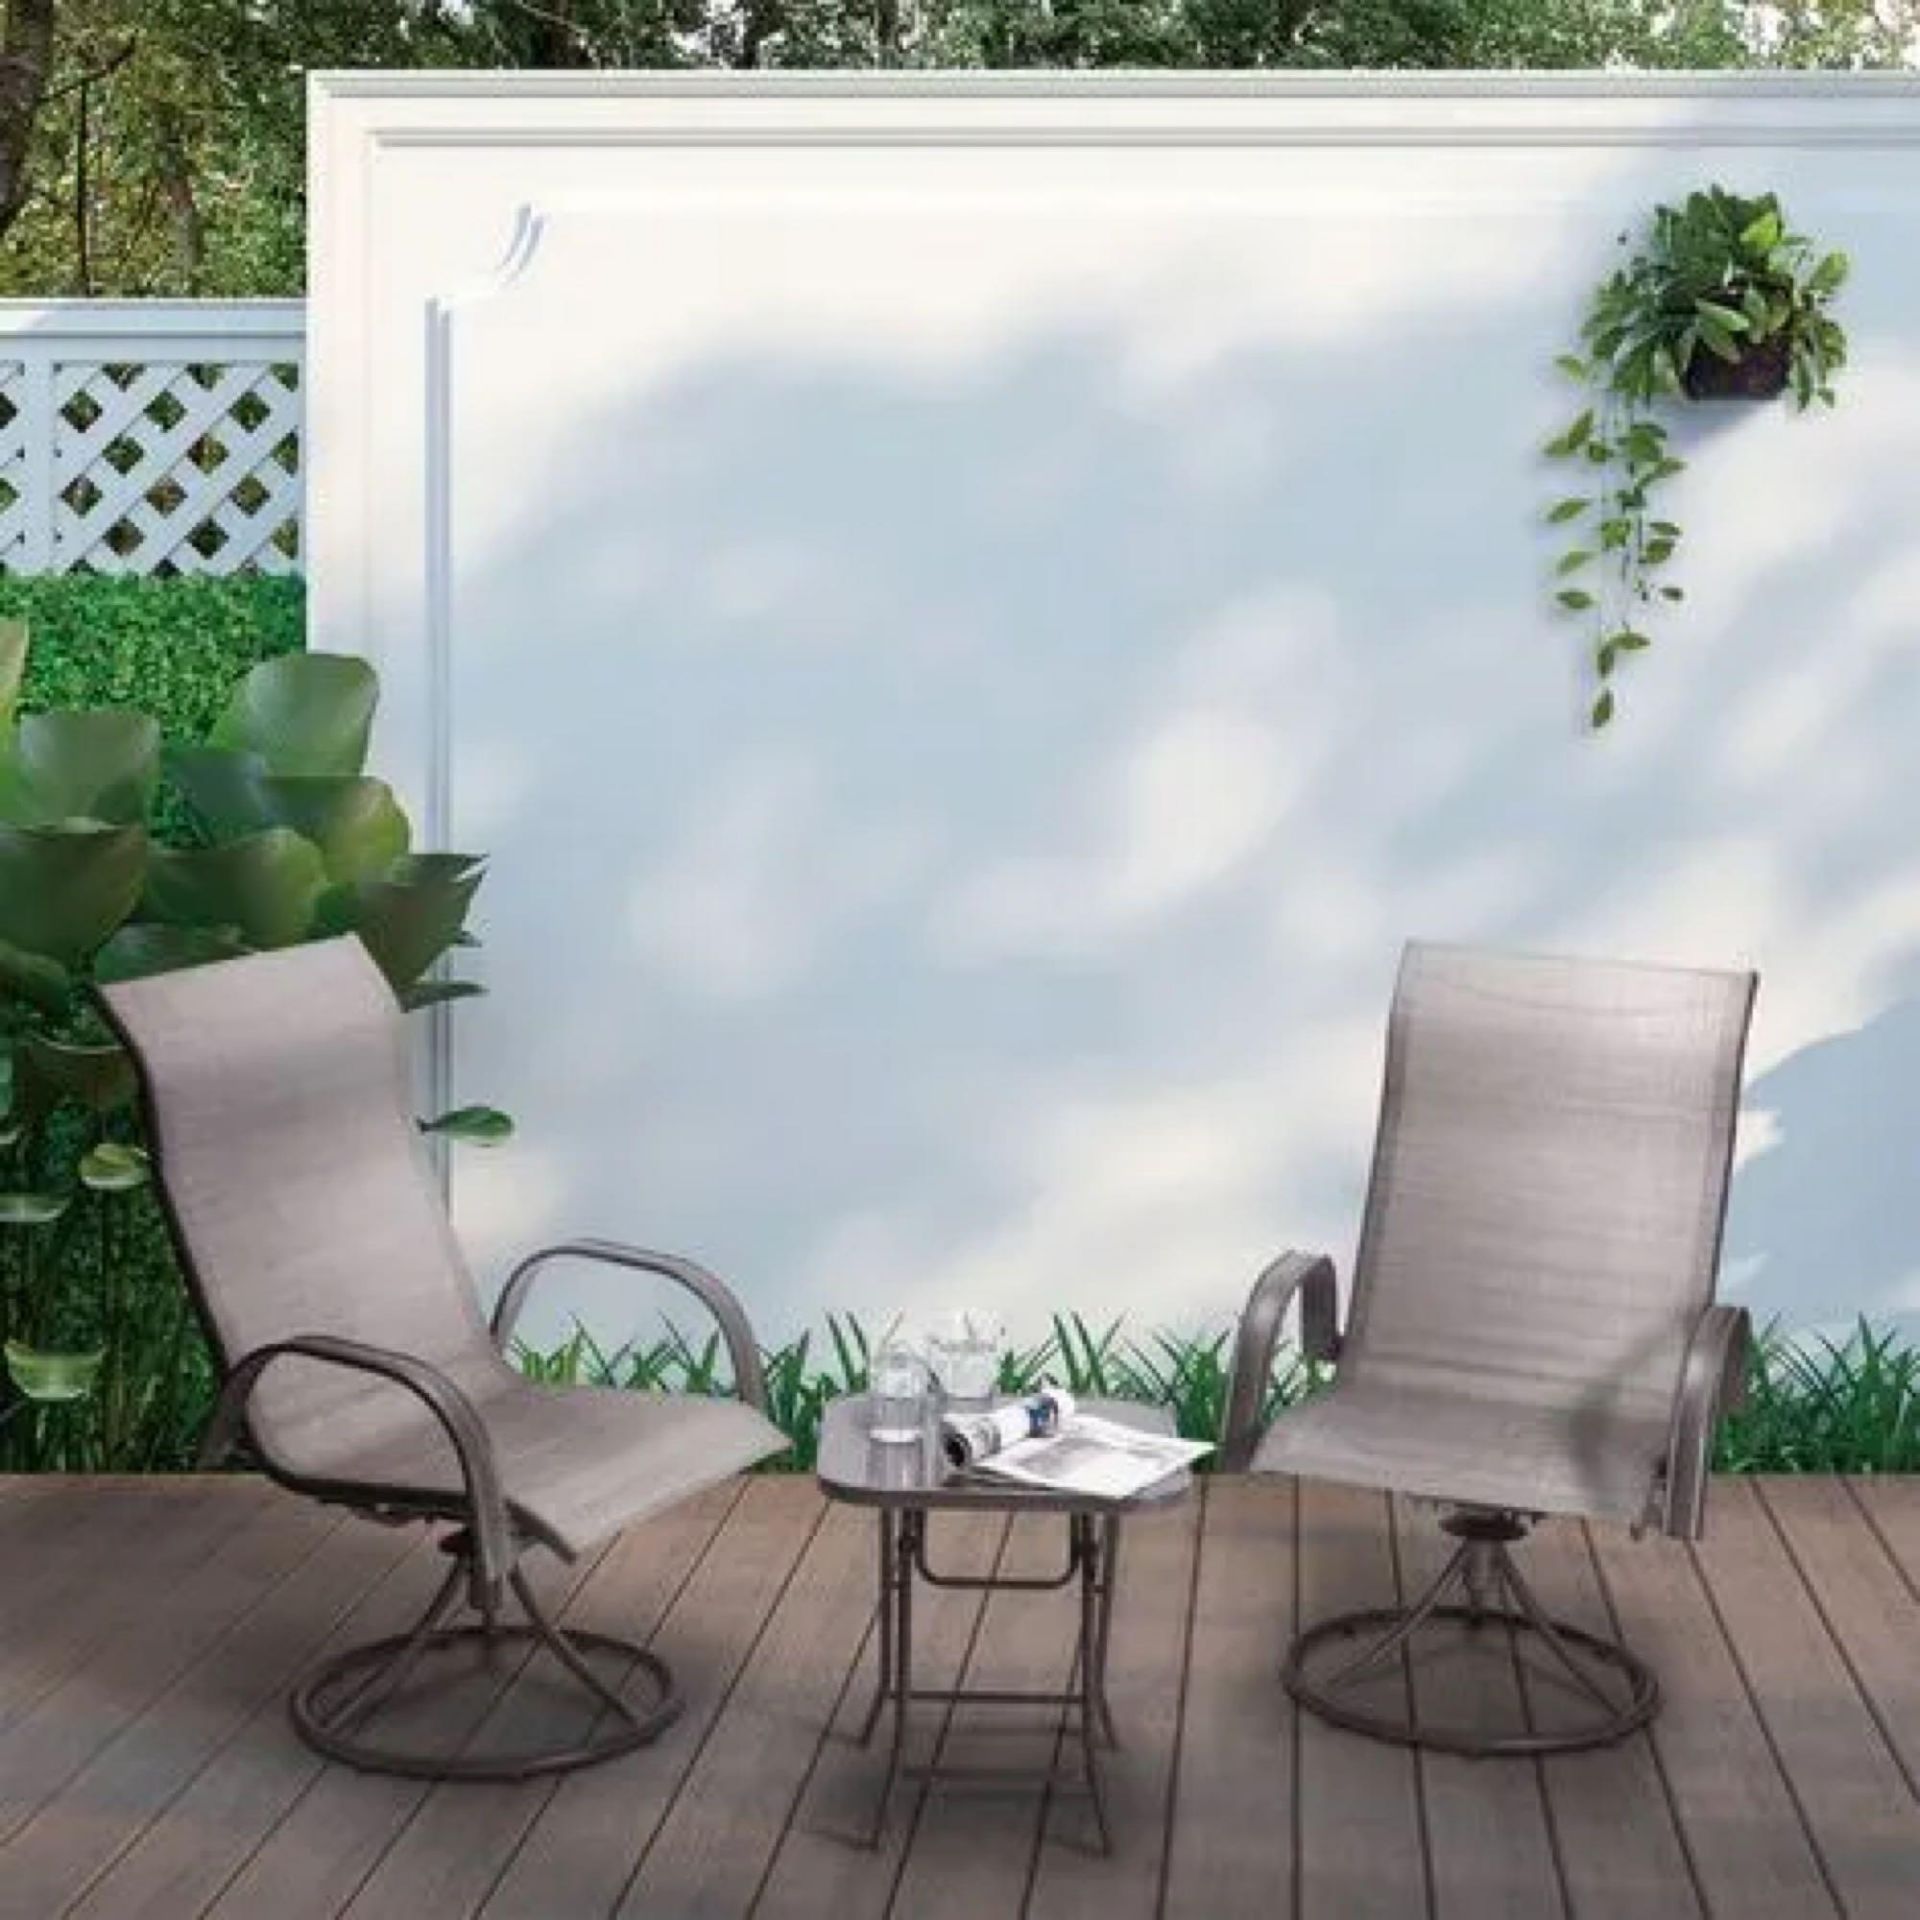 RRP £300 Boxed Peaktop Garden Patio Furniture Set Table & 2 Chairs Grey Bistro Set Pt-Of0003